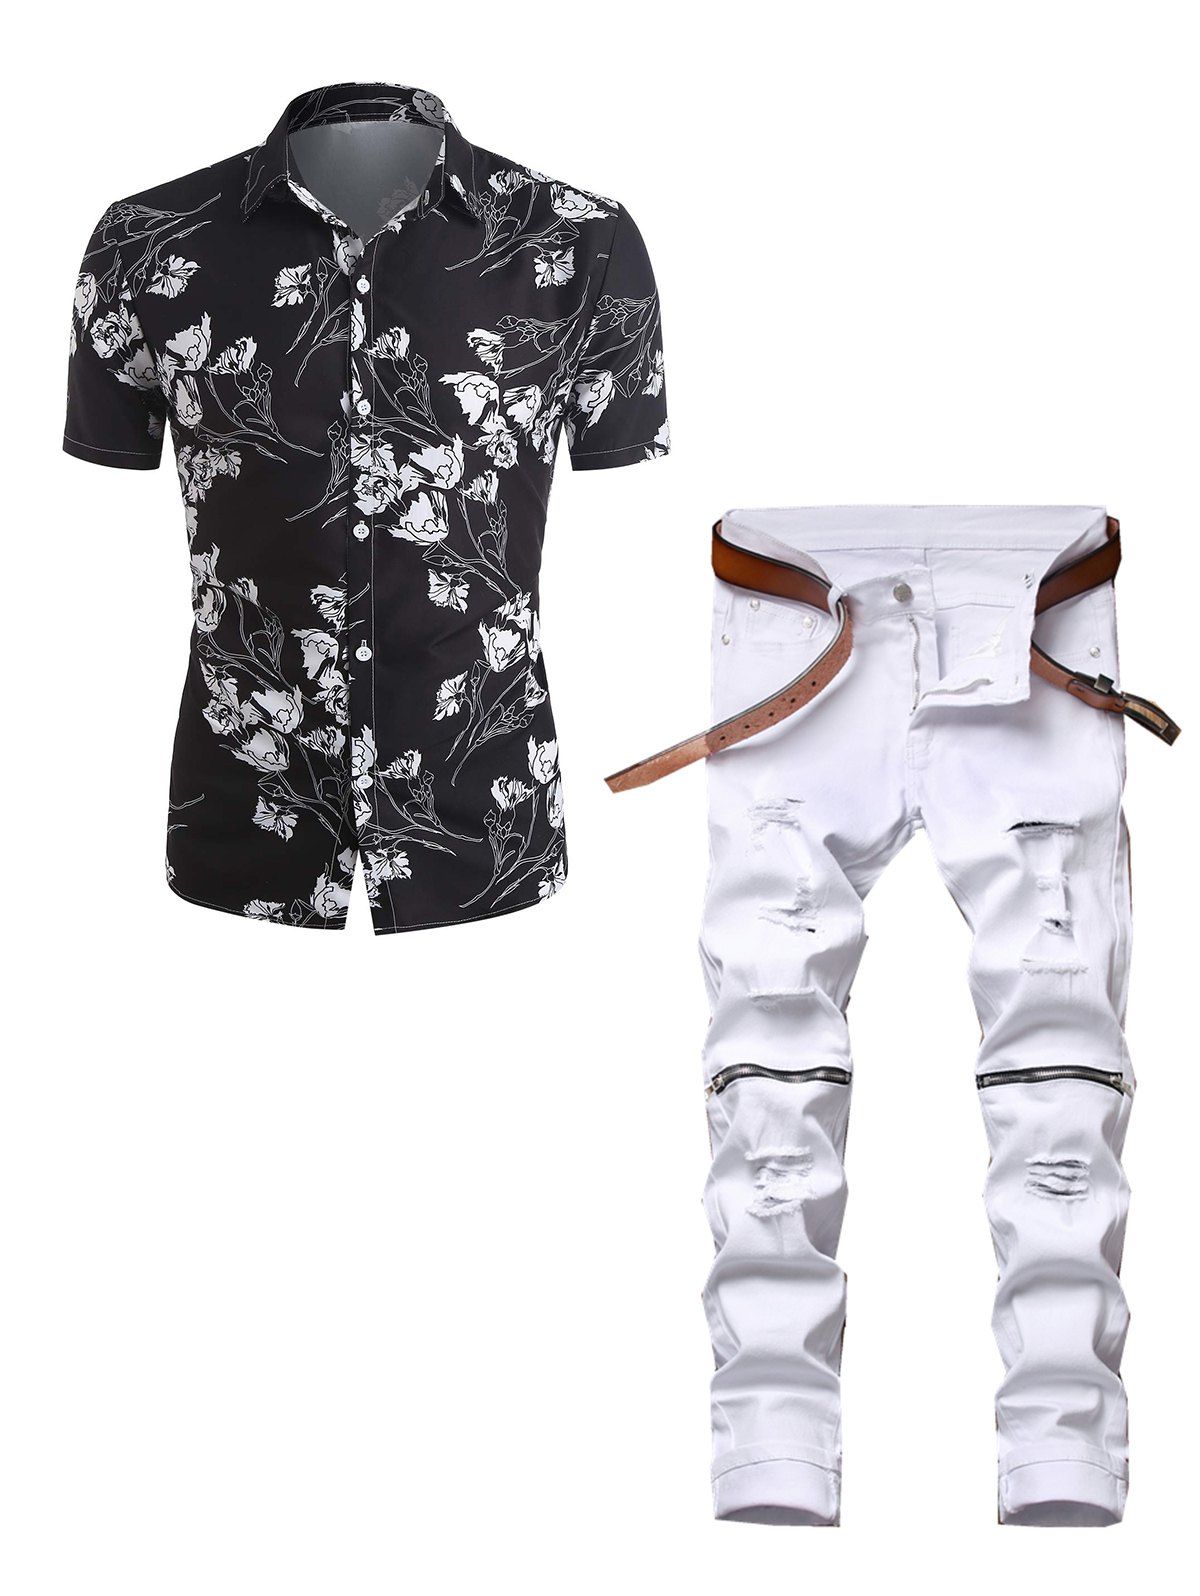 Short Sleeve Flower Print Button Up Vacation Shirt and Destroy Wash Zipper Embellishment Jeans Casual Outfit - BLACK M